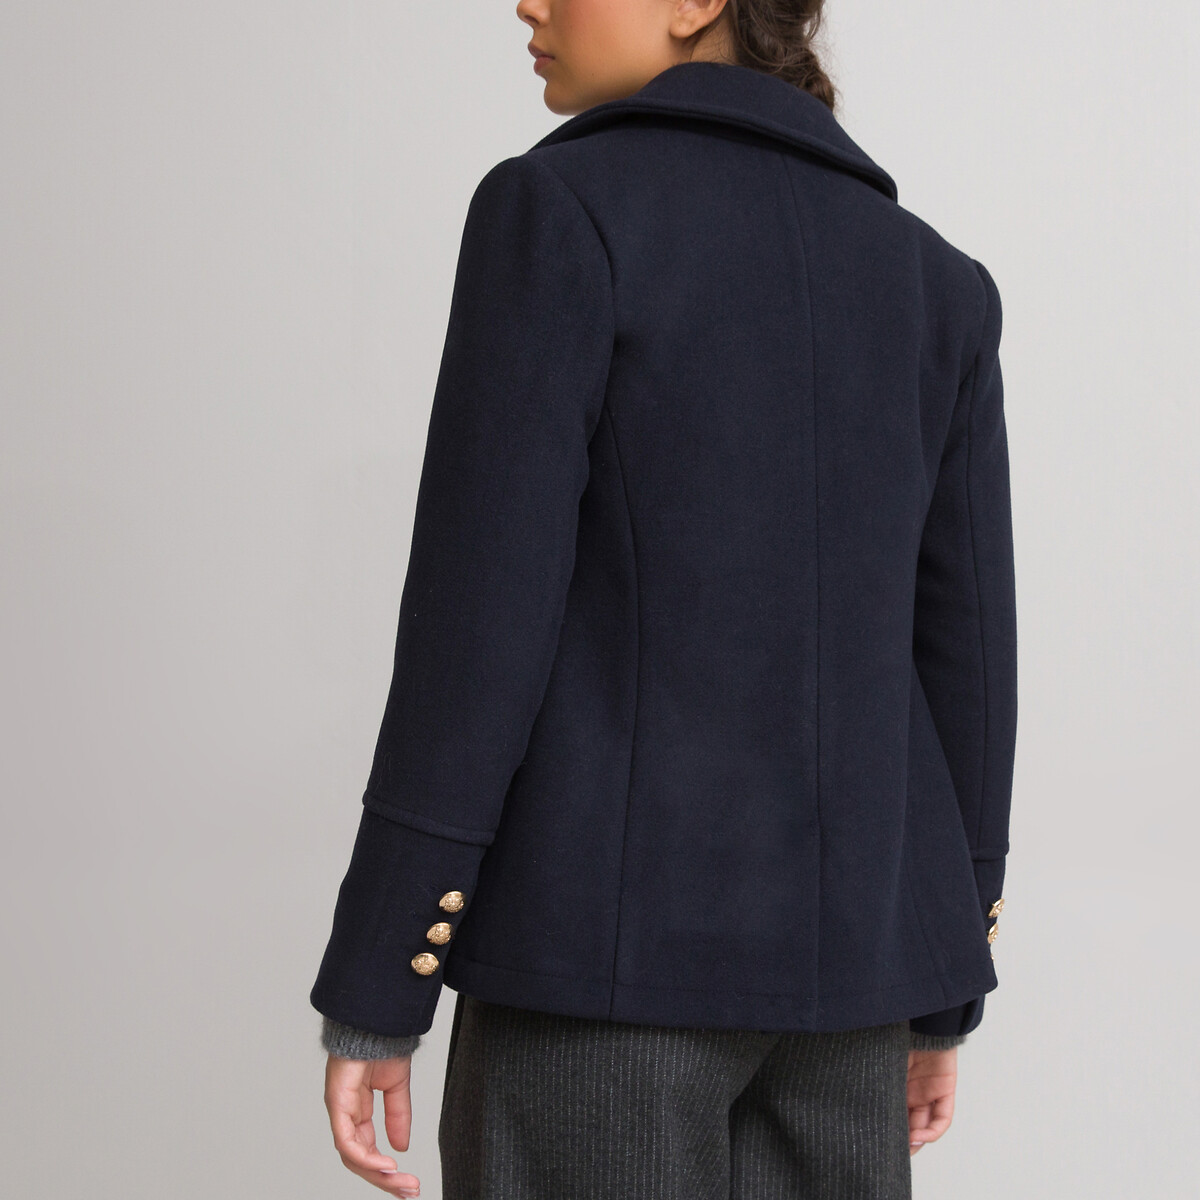 La Redoute Wool Navy Pea Coat Size 8 16 Double Breasted Brass Button RRP£100